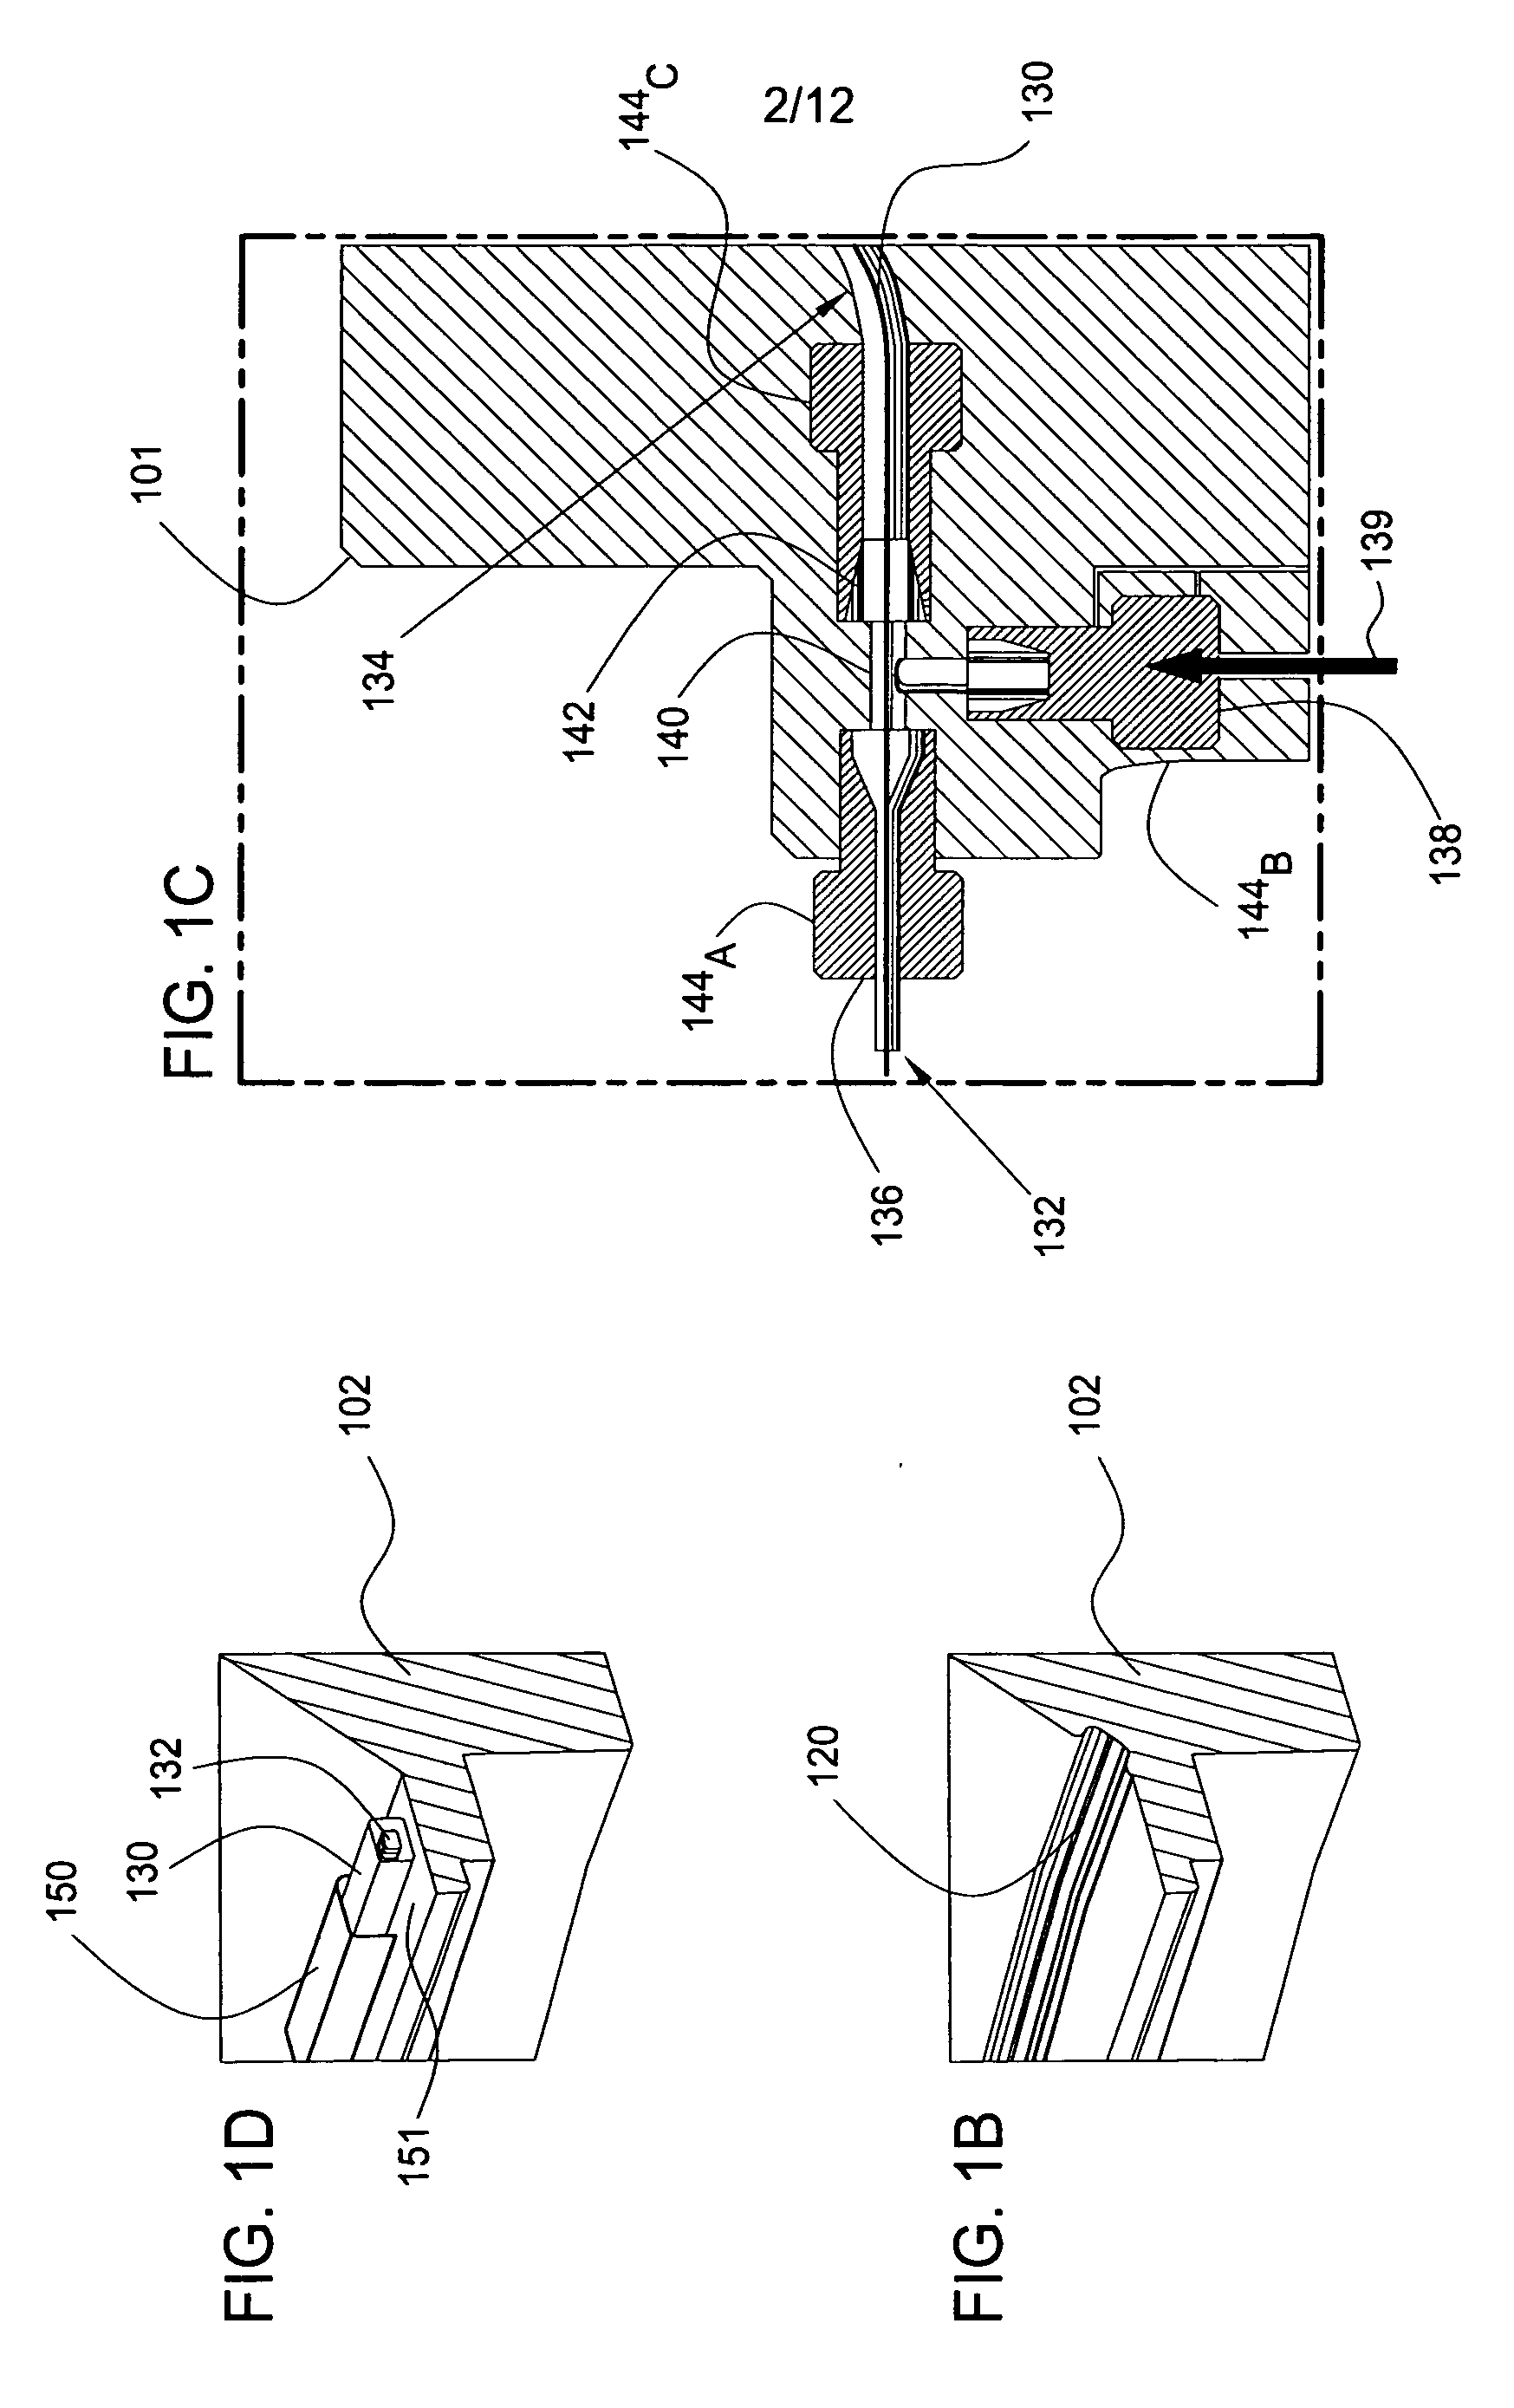 Apparatus and method for improving uniformity in electroplating